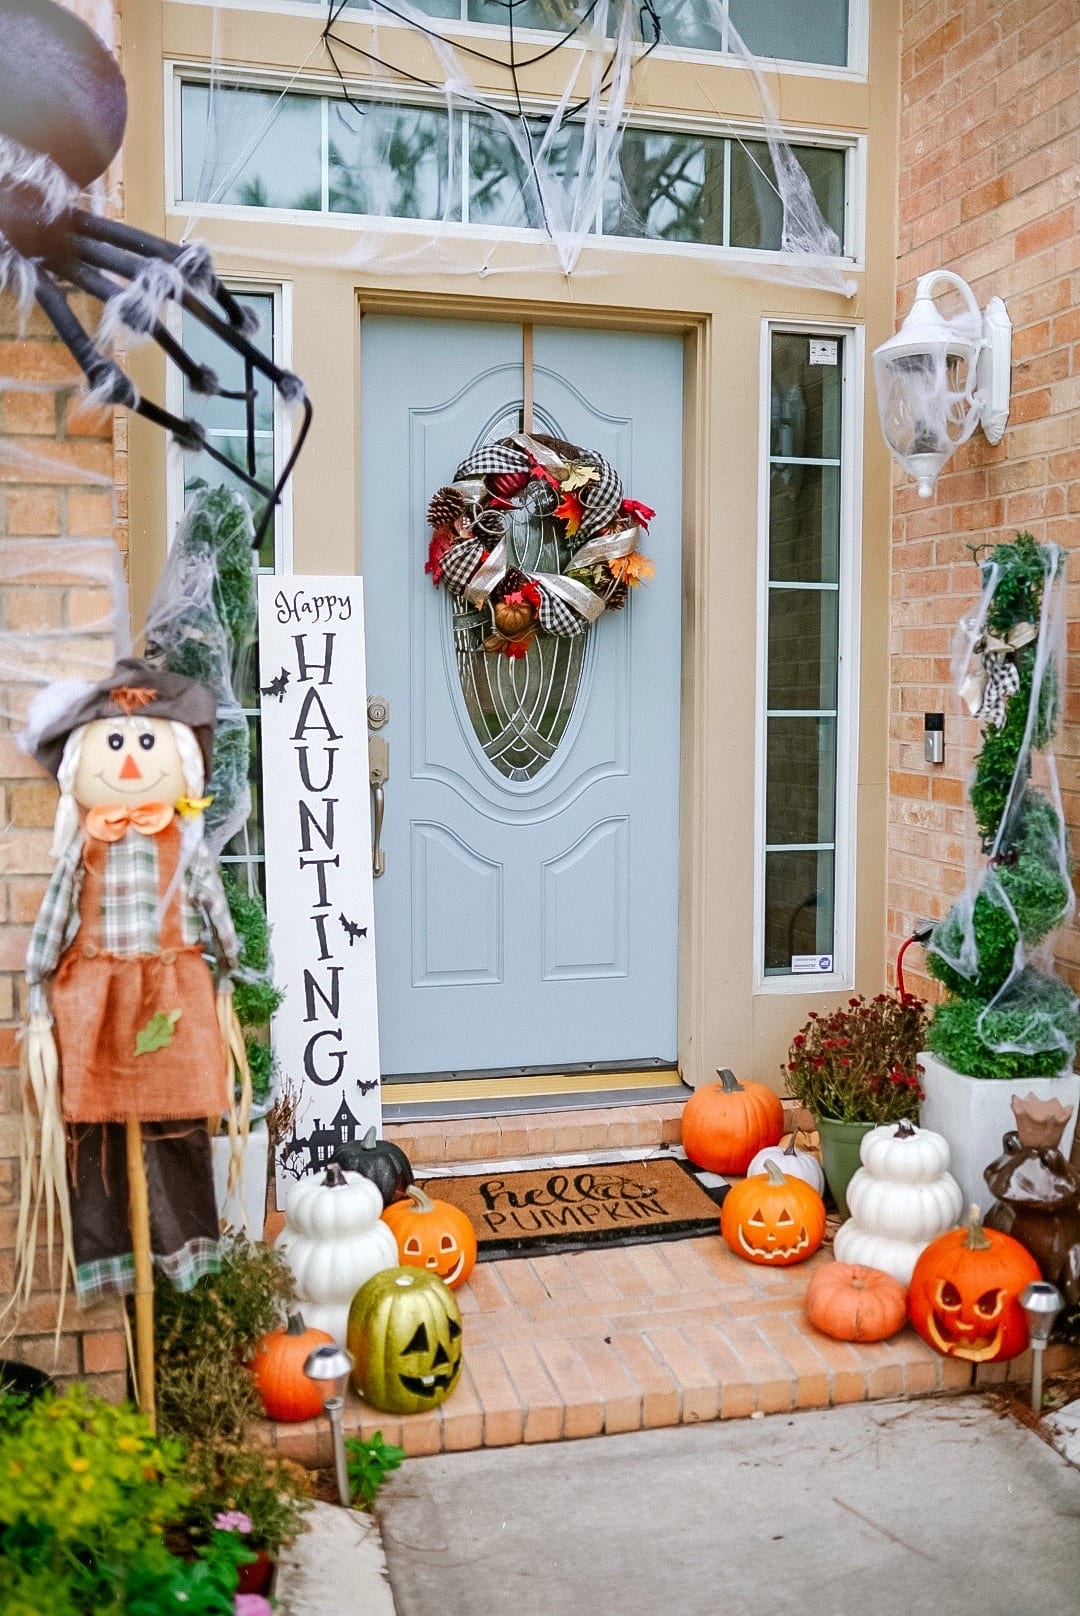 Halloween Home Decoration Reveal - Dawn P. Darnell